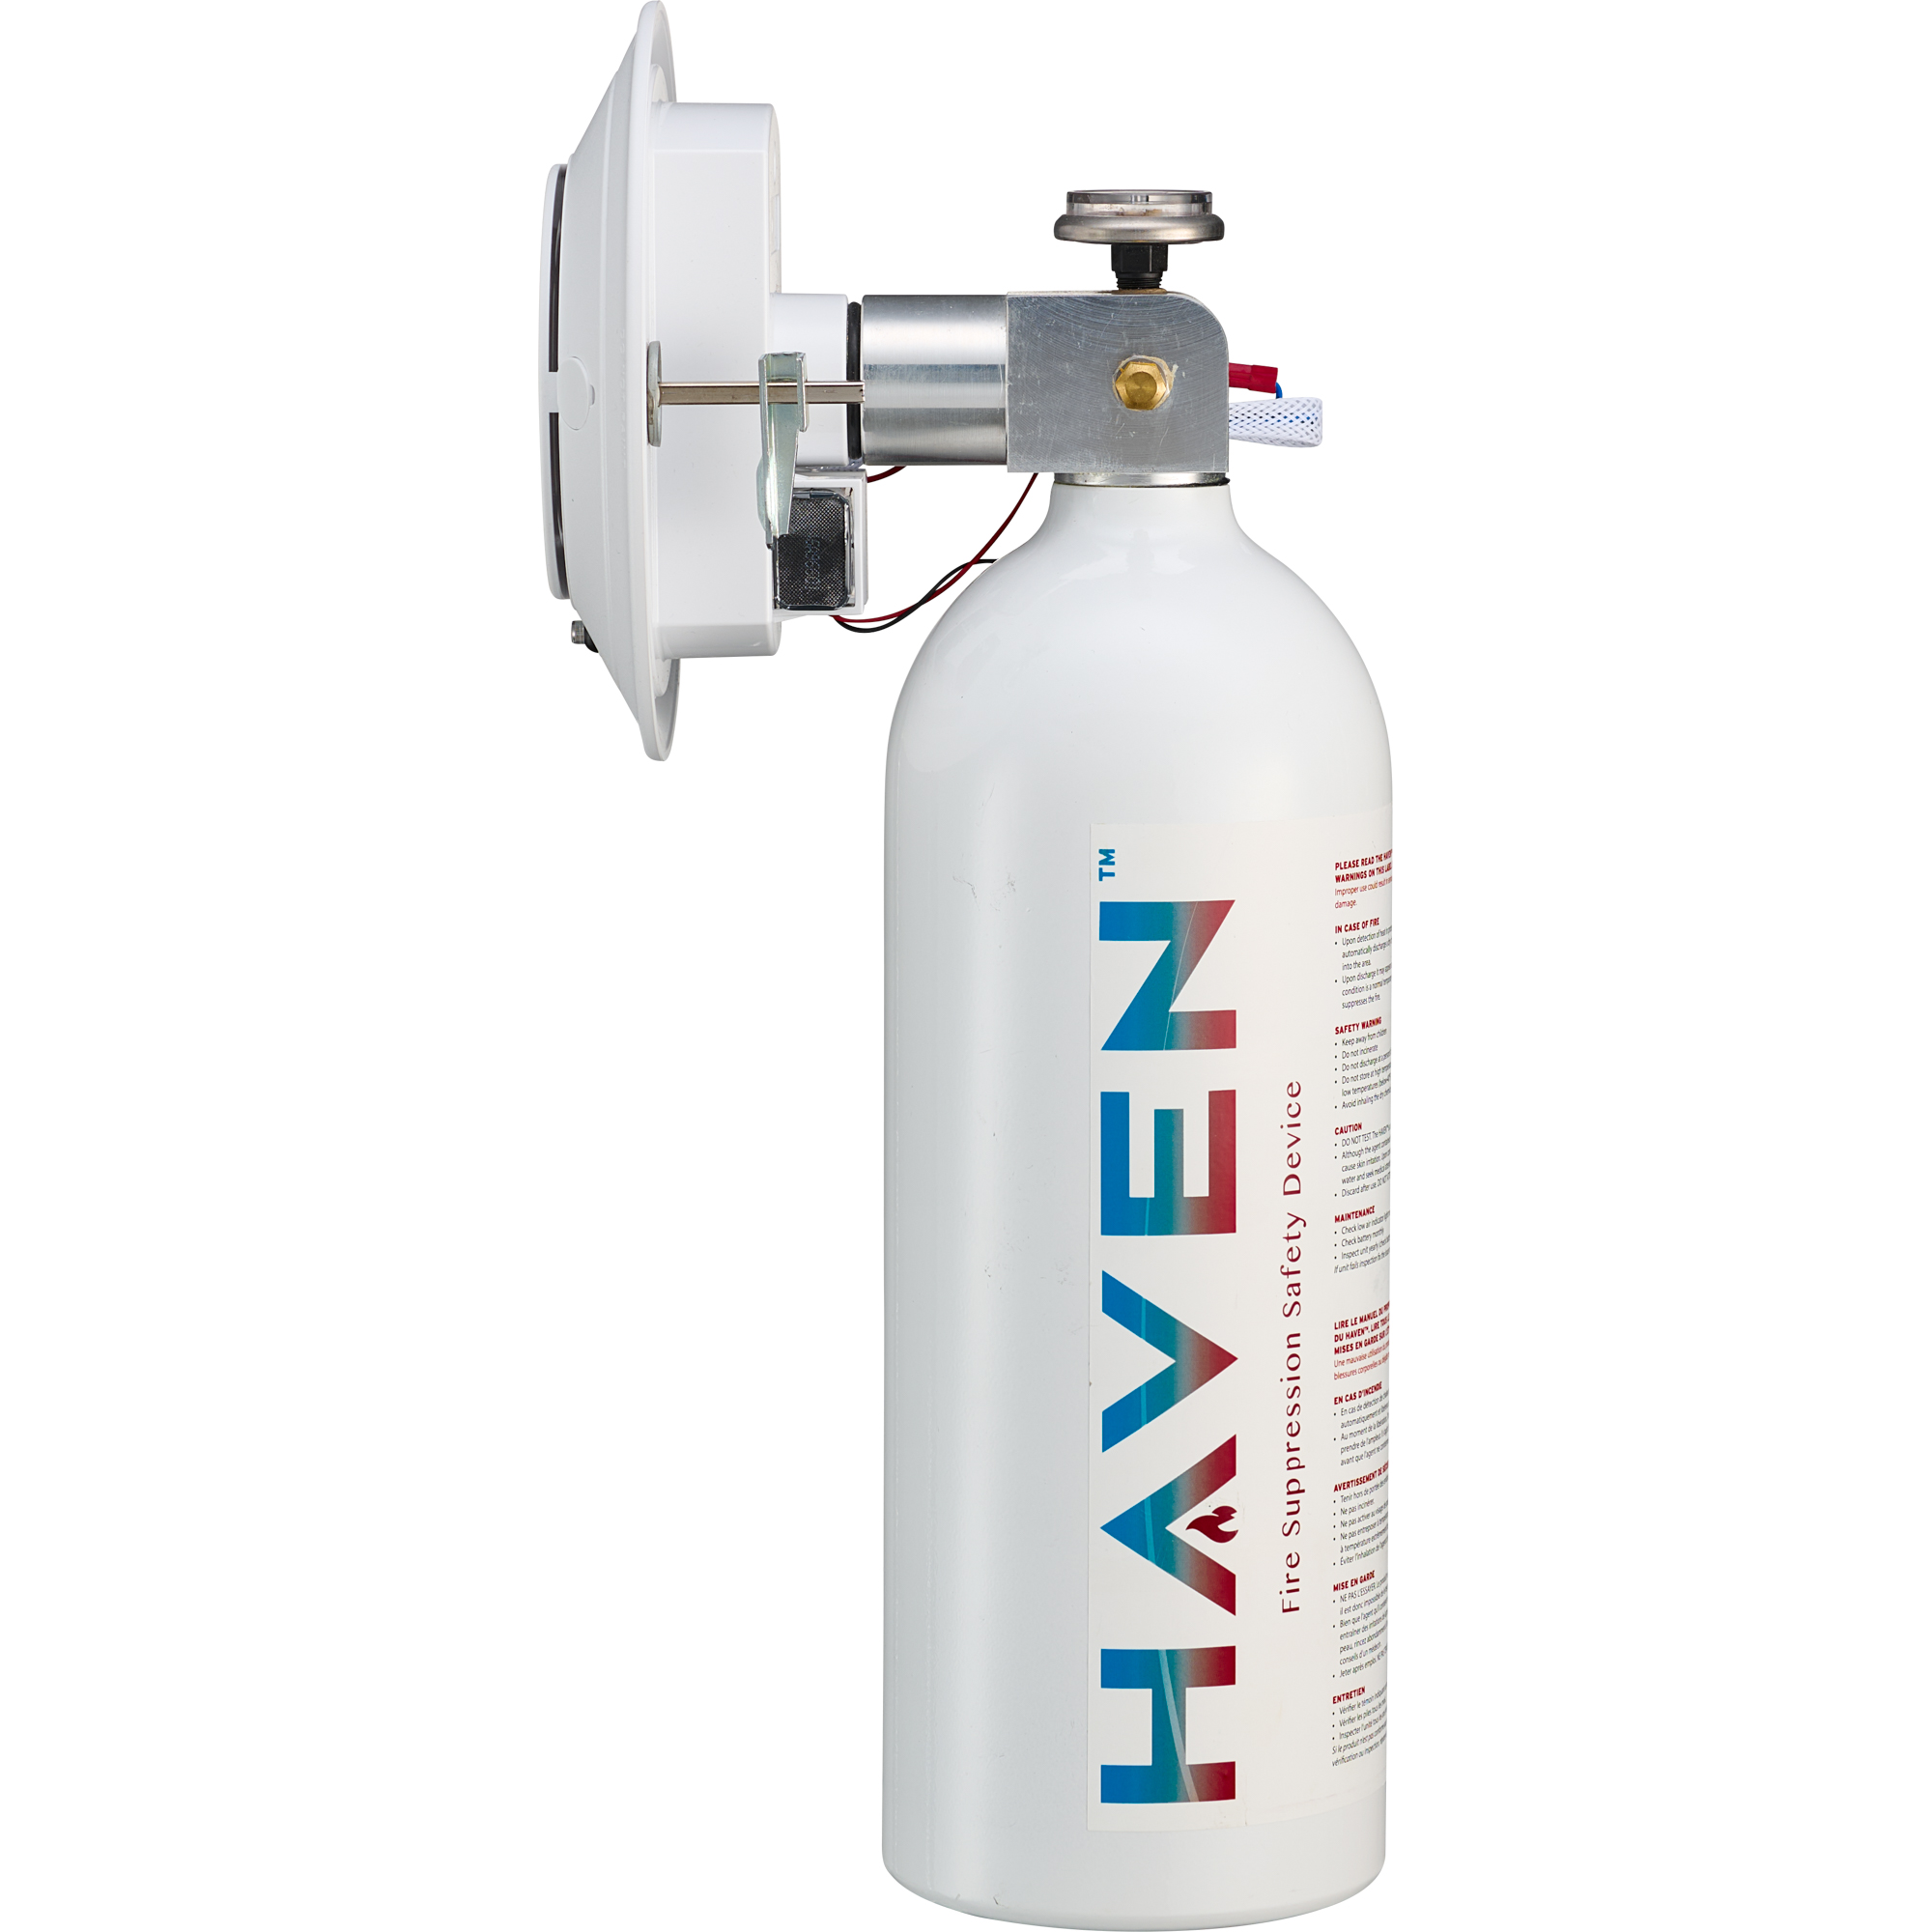 HAVEN 5lb Fire Suppression Safety Device 135F - 57C Rated